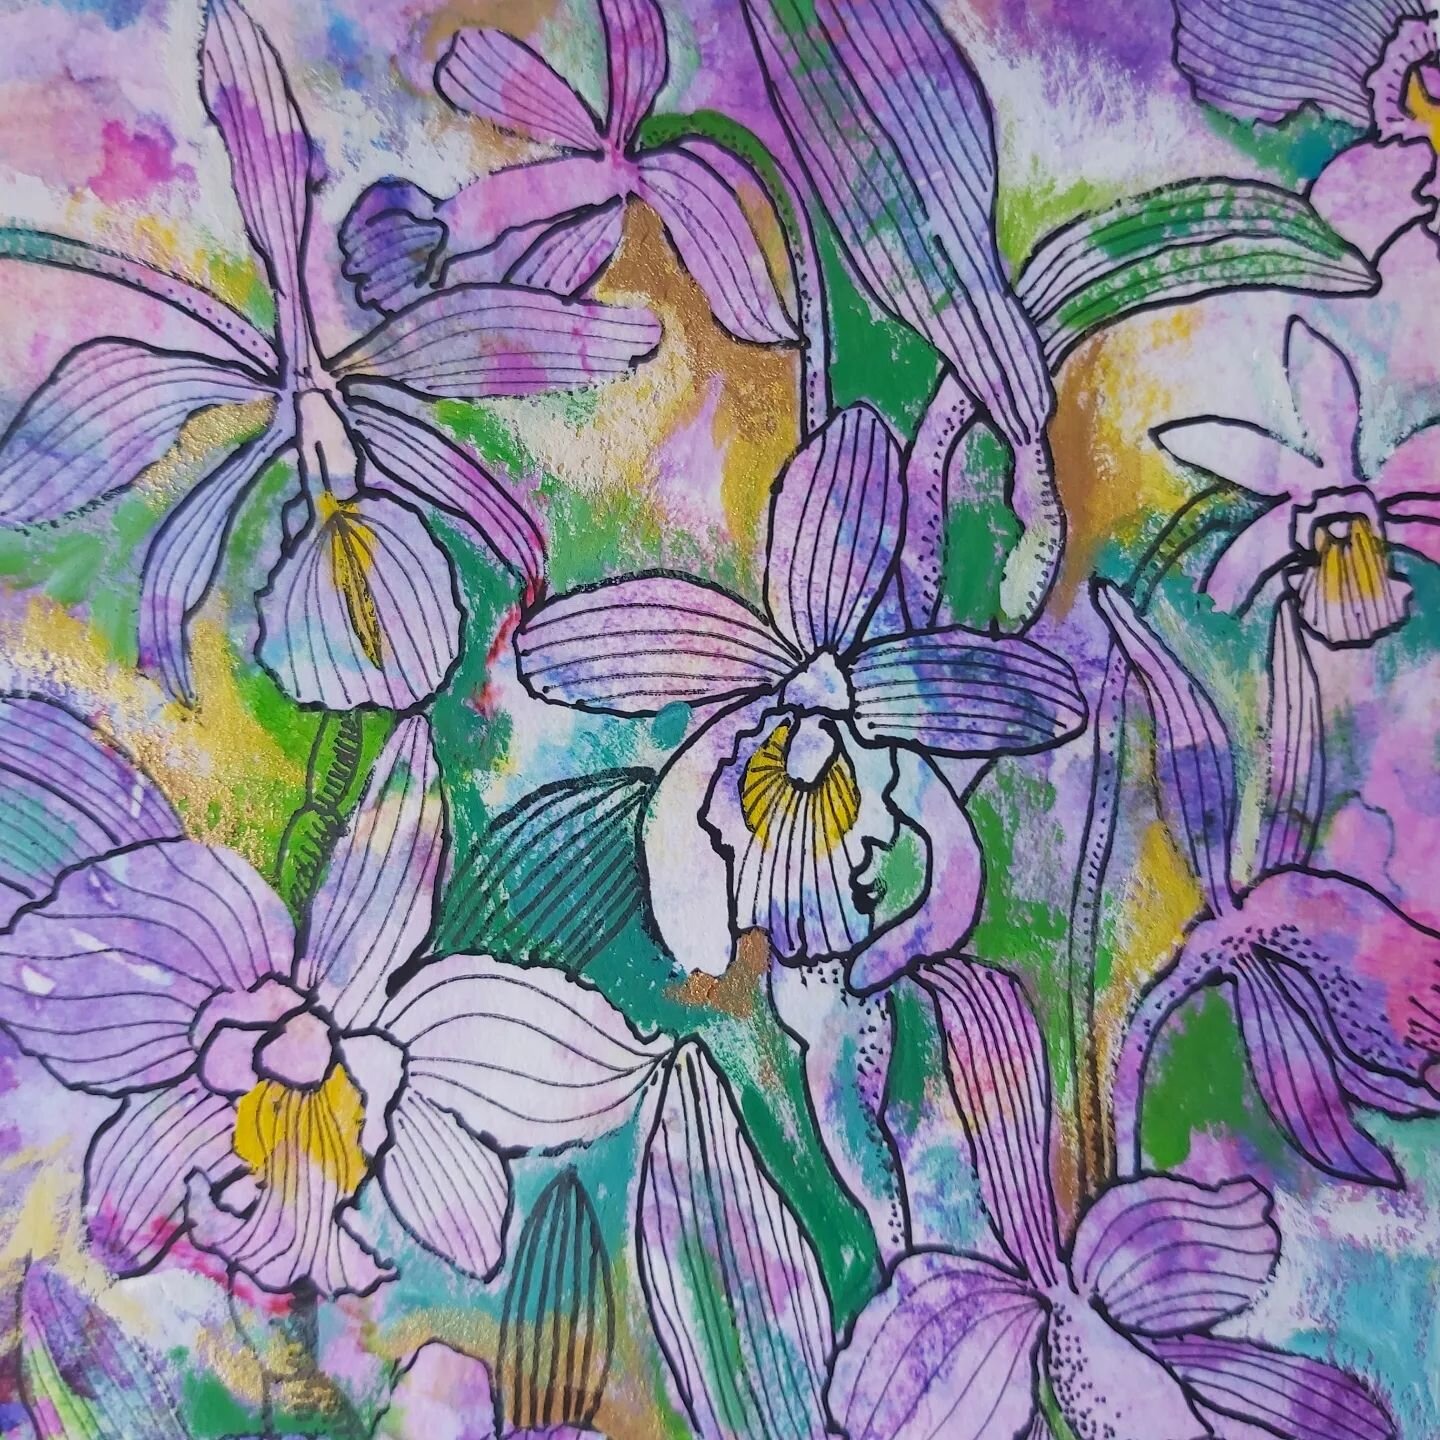 &quot;Orchid Garden&quot; Digital inkjet print with mixed media (acrylic paint and ink) on rag paper. #flowerart #flowerartist #townsvilleartist #mixedmedia #flowerdrawing #orchidpainting #creative #inkjetprint #brightandcolourful #atelieracrylic #pe